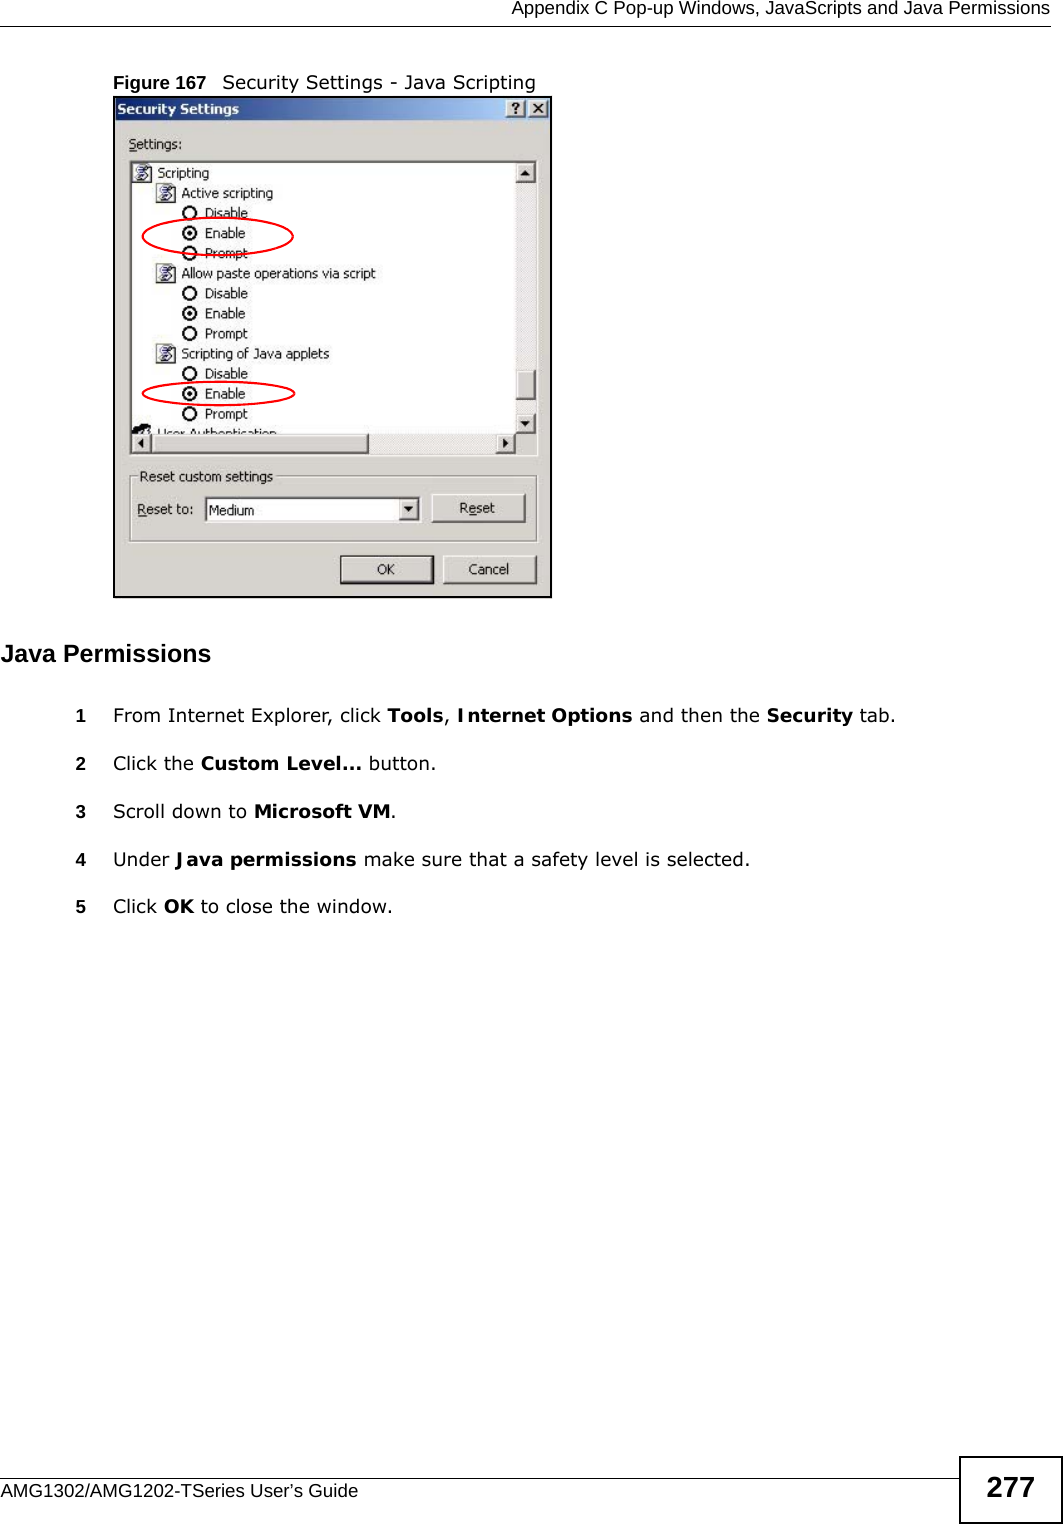  Appendix C Pop-up Windows, JavaScripts and Java PermissionsAMG1302/AMG1202-TSeries User’s Guide 277Figure 167   Security Settings - Java ScriptingJava Permissions1From Internet Explorer, click Tools, Internet Options and then the Security tab. 2Click the Custom Level... button. 3Scroll down to Microsoft VM. 4Under Java permissions make sure that a safety level is selected.5Click OK to close the window.